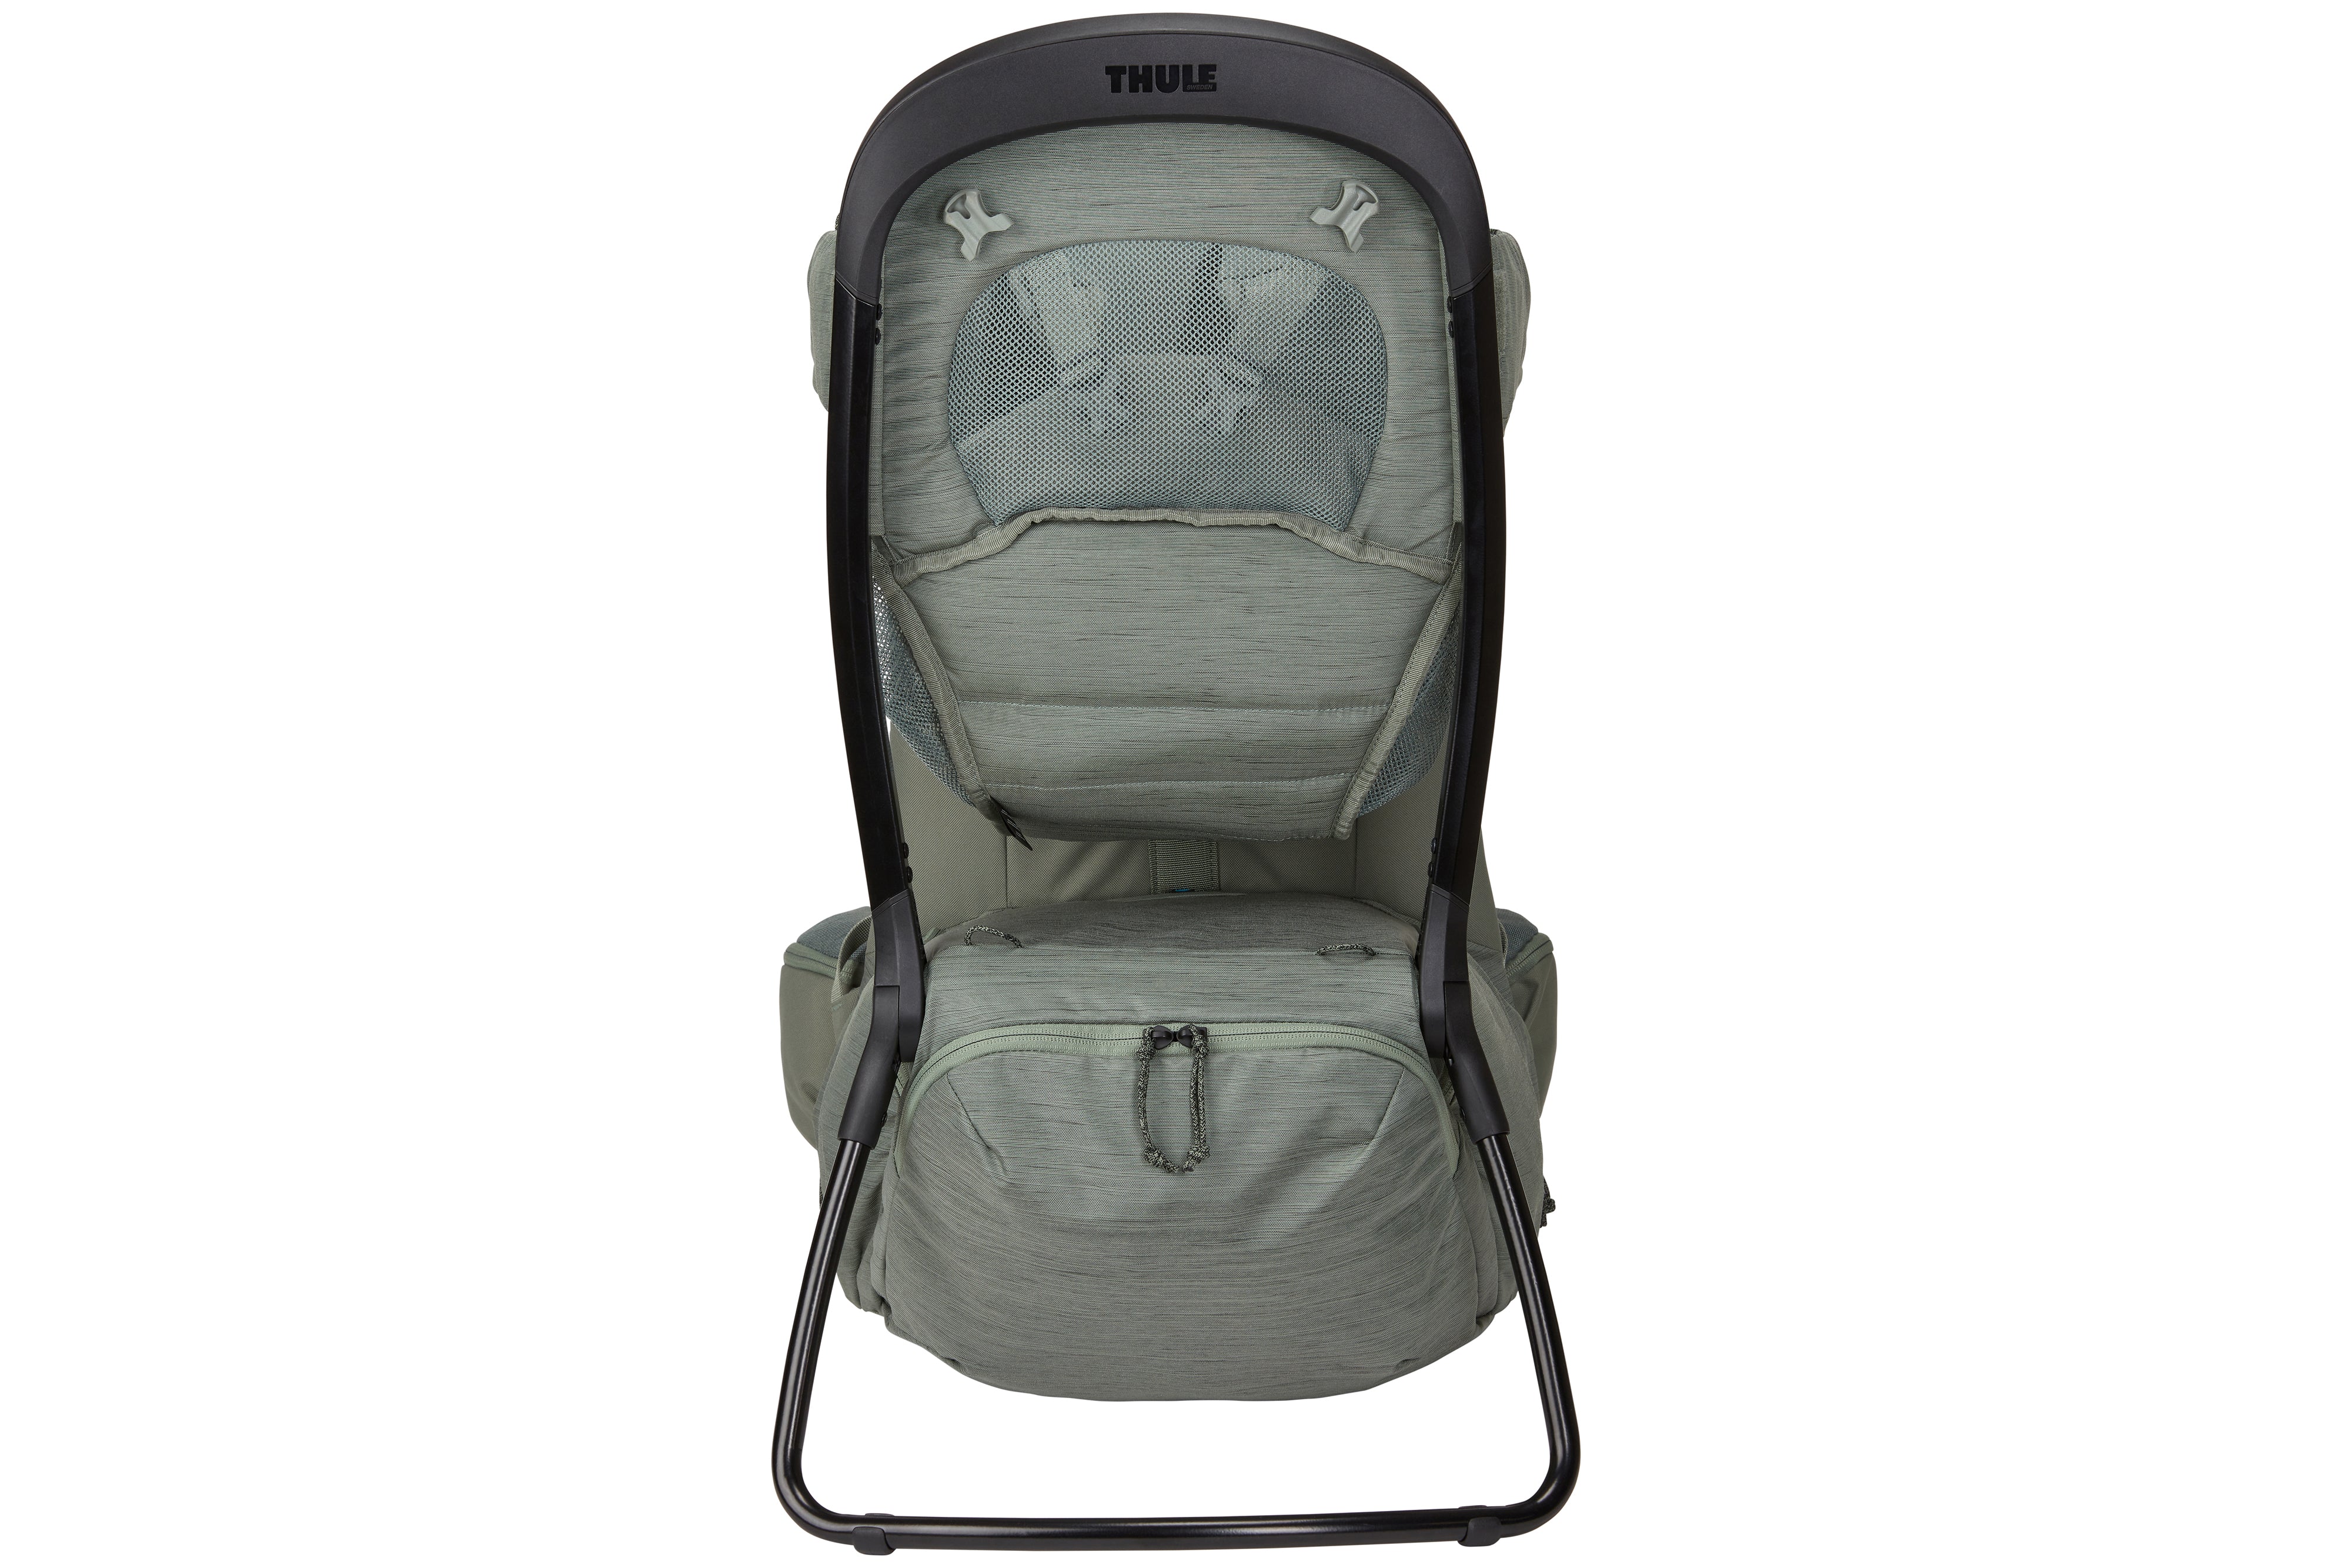 Thule Child Carrier Backpack Sapling back view Agave Green